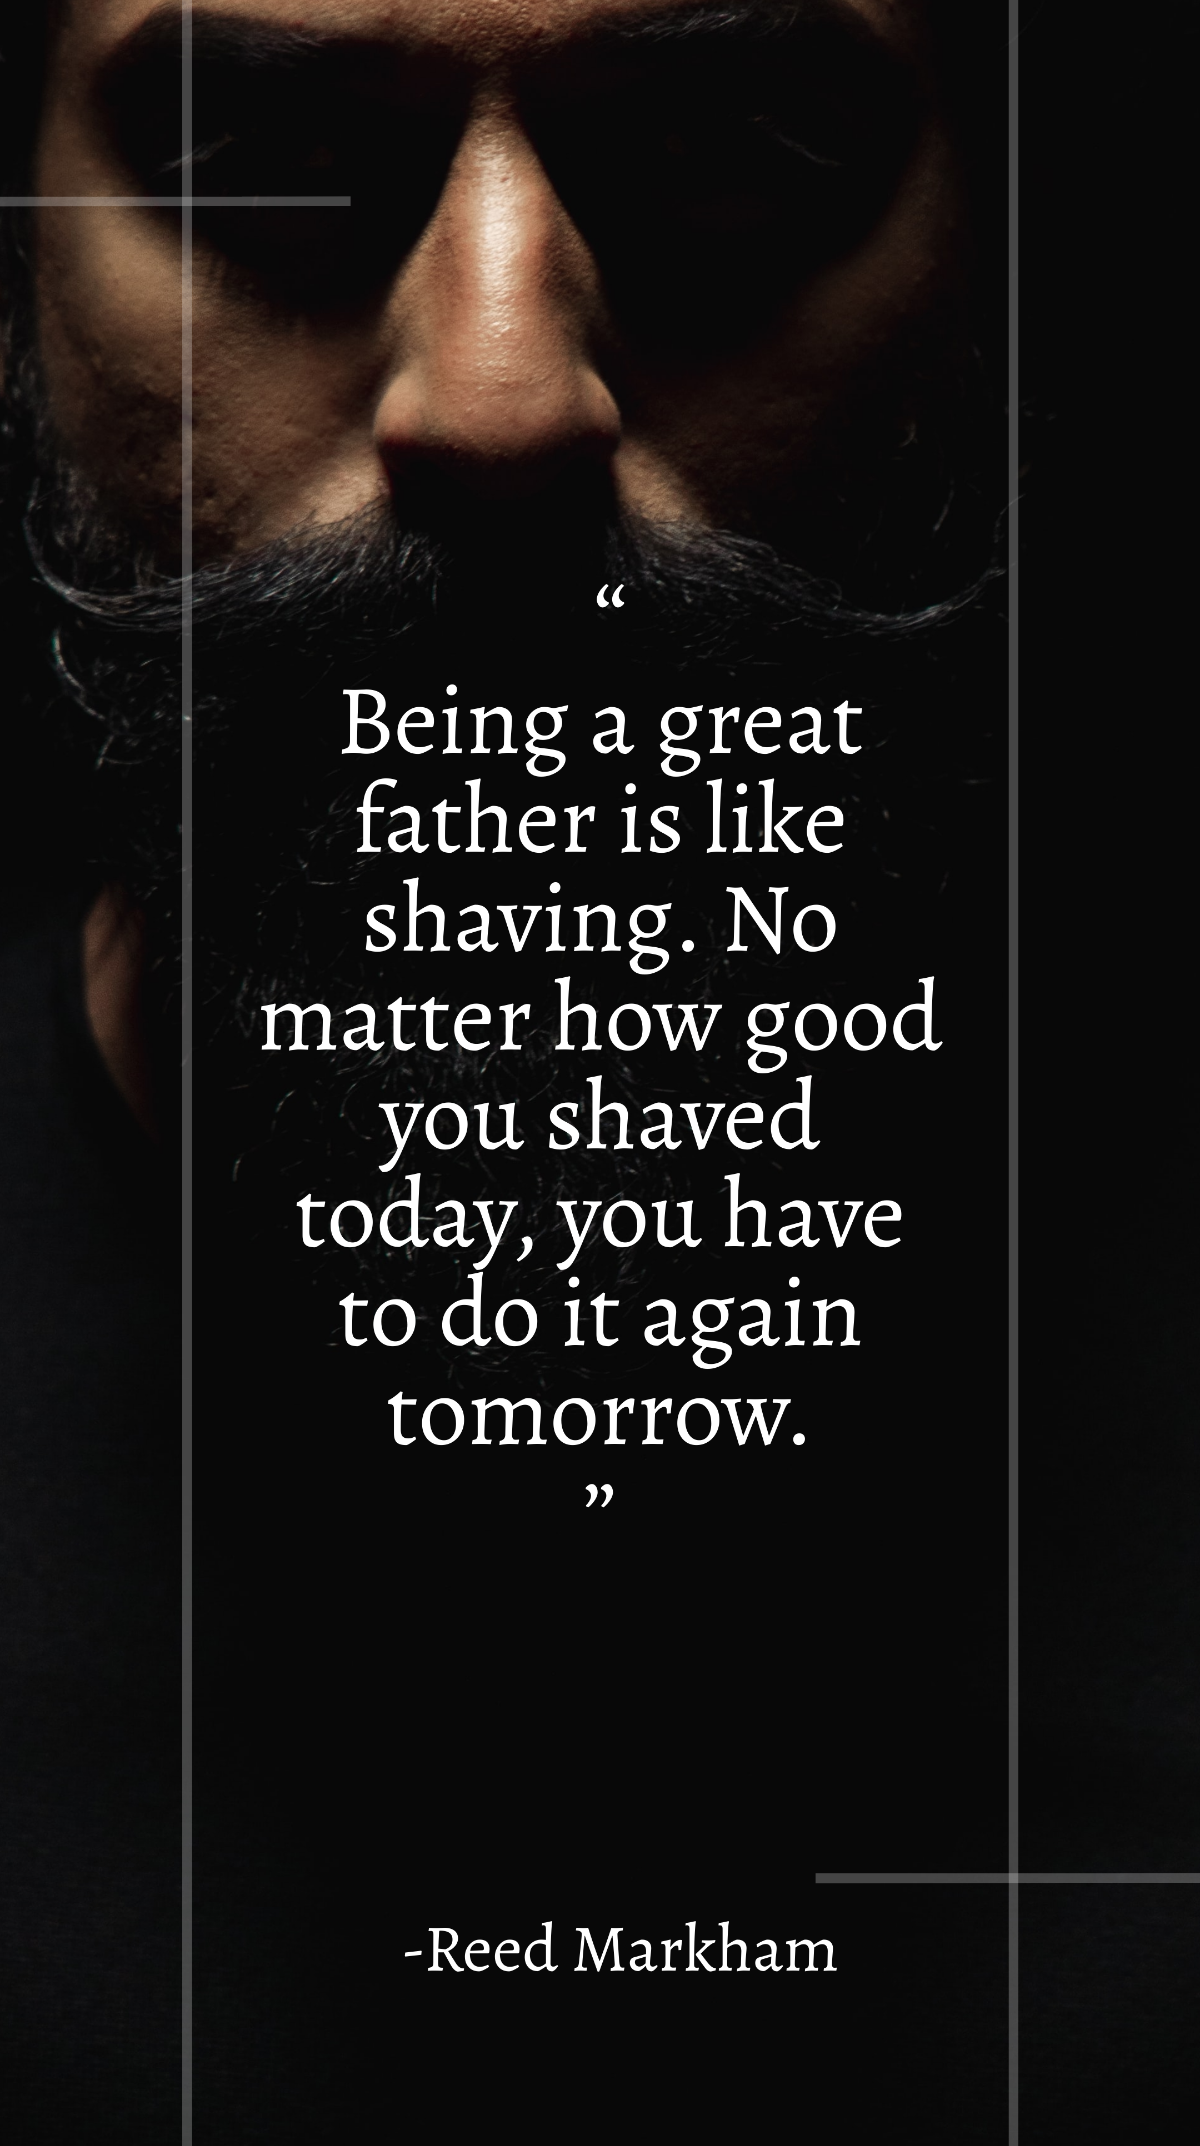 Reed Markham - “Being a great father is like shaving. No matter how good you shaved today, you have to do it again tomorrow.